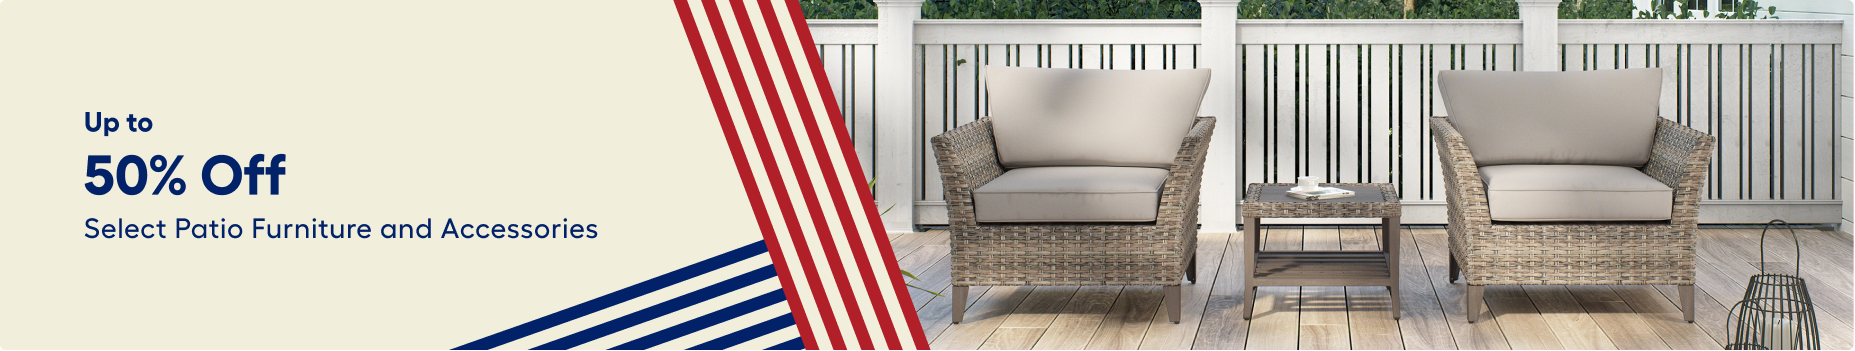 Up to 50% off Patio Furniture and Accessories